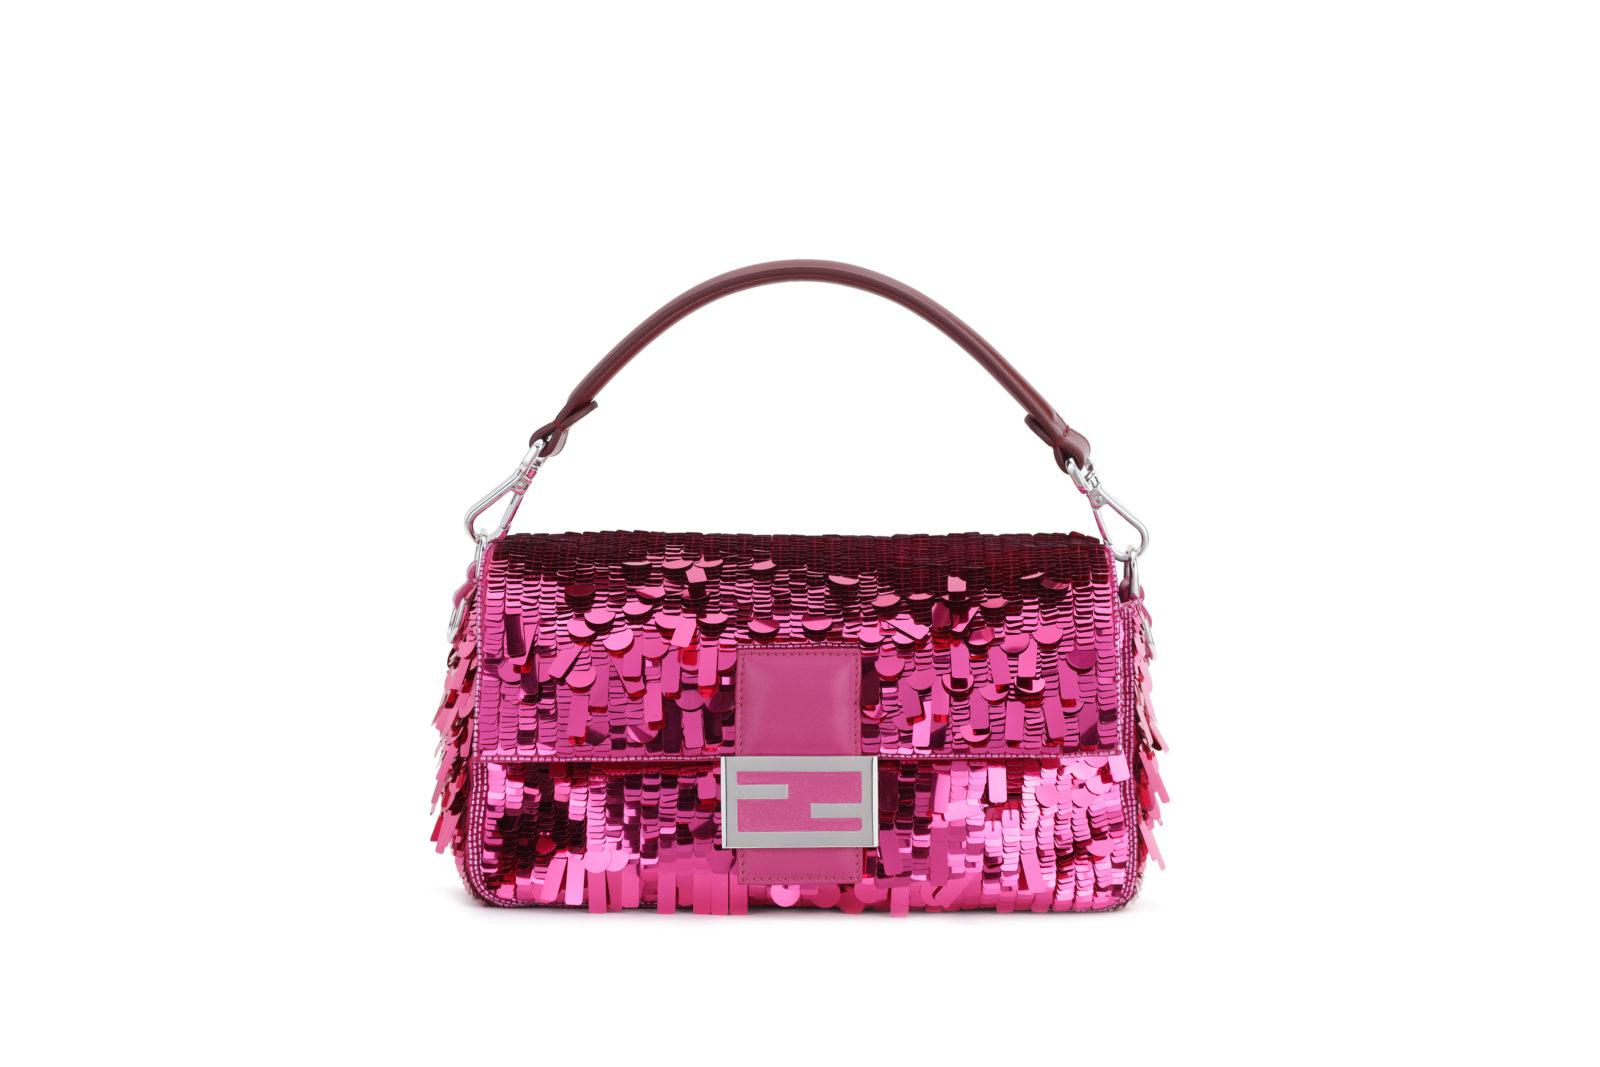 Fendi collaborates with artist Sarah Coleman on a glow-in-the-dark peekaboo bag  collection for 2020 Design Miami - Luxurylaunches